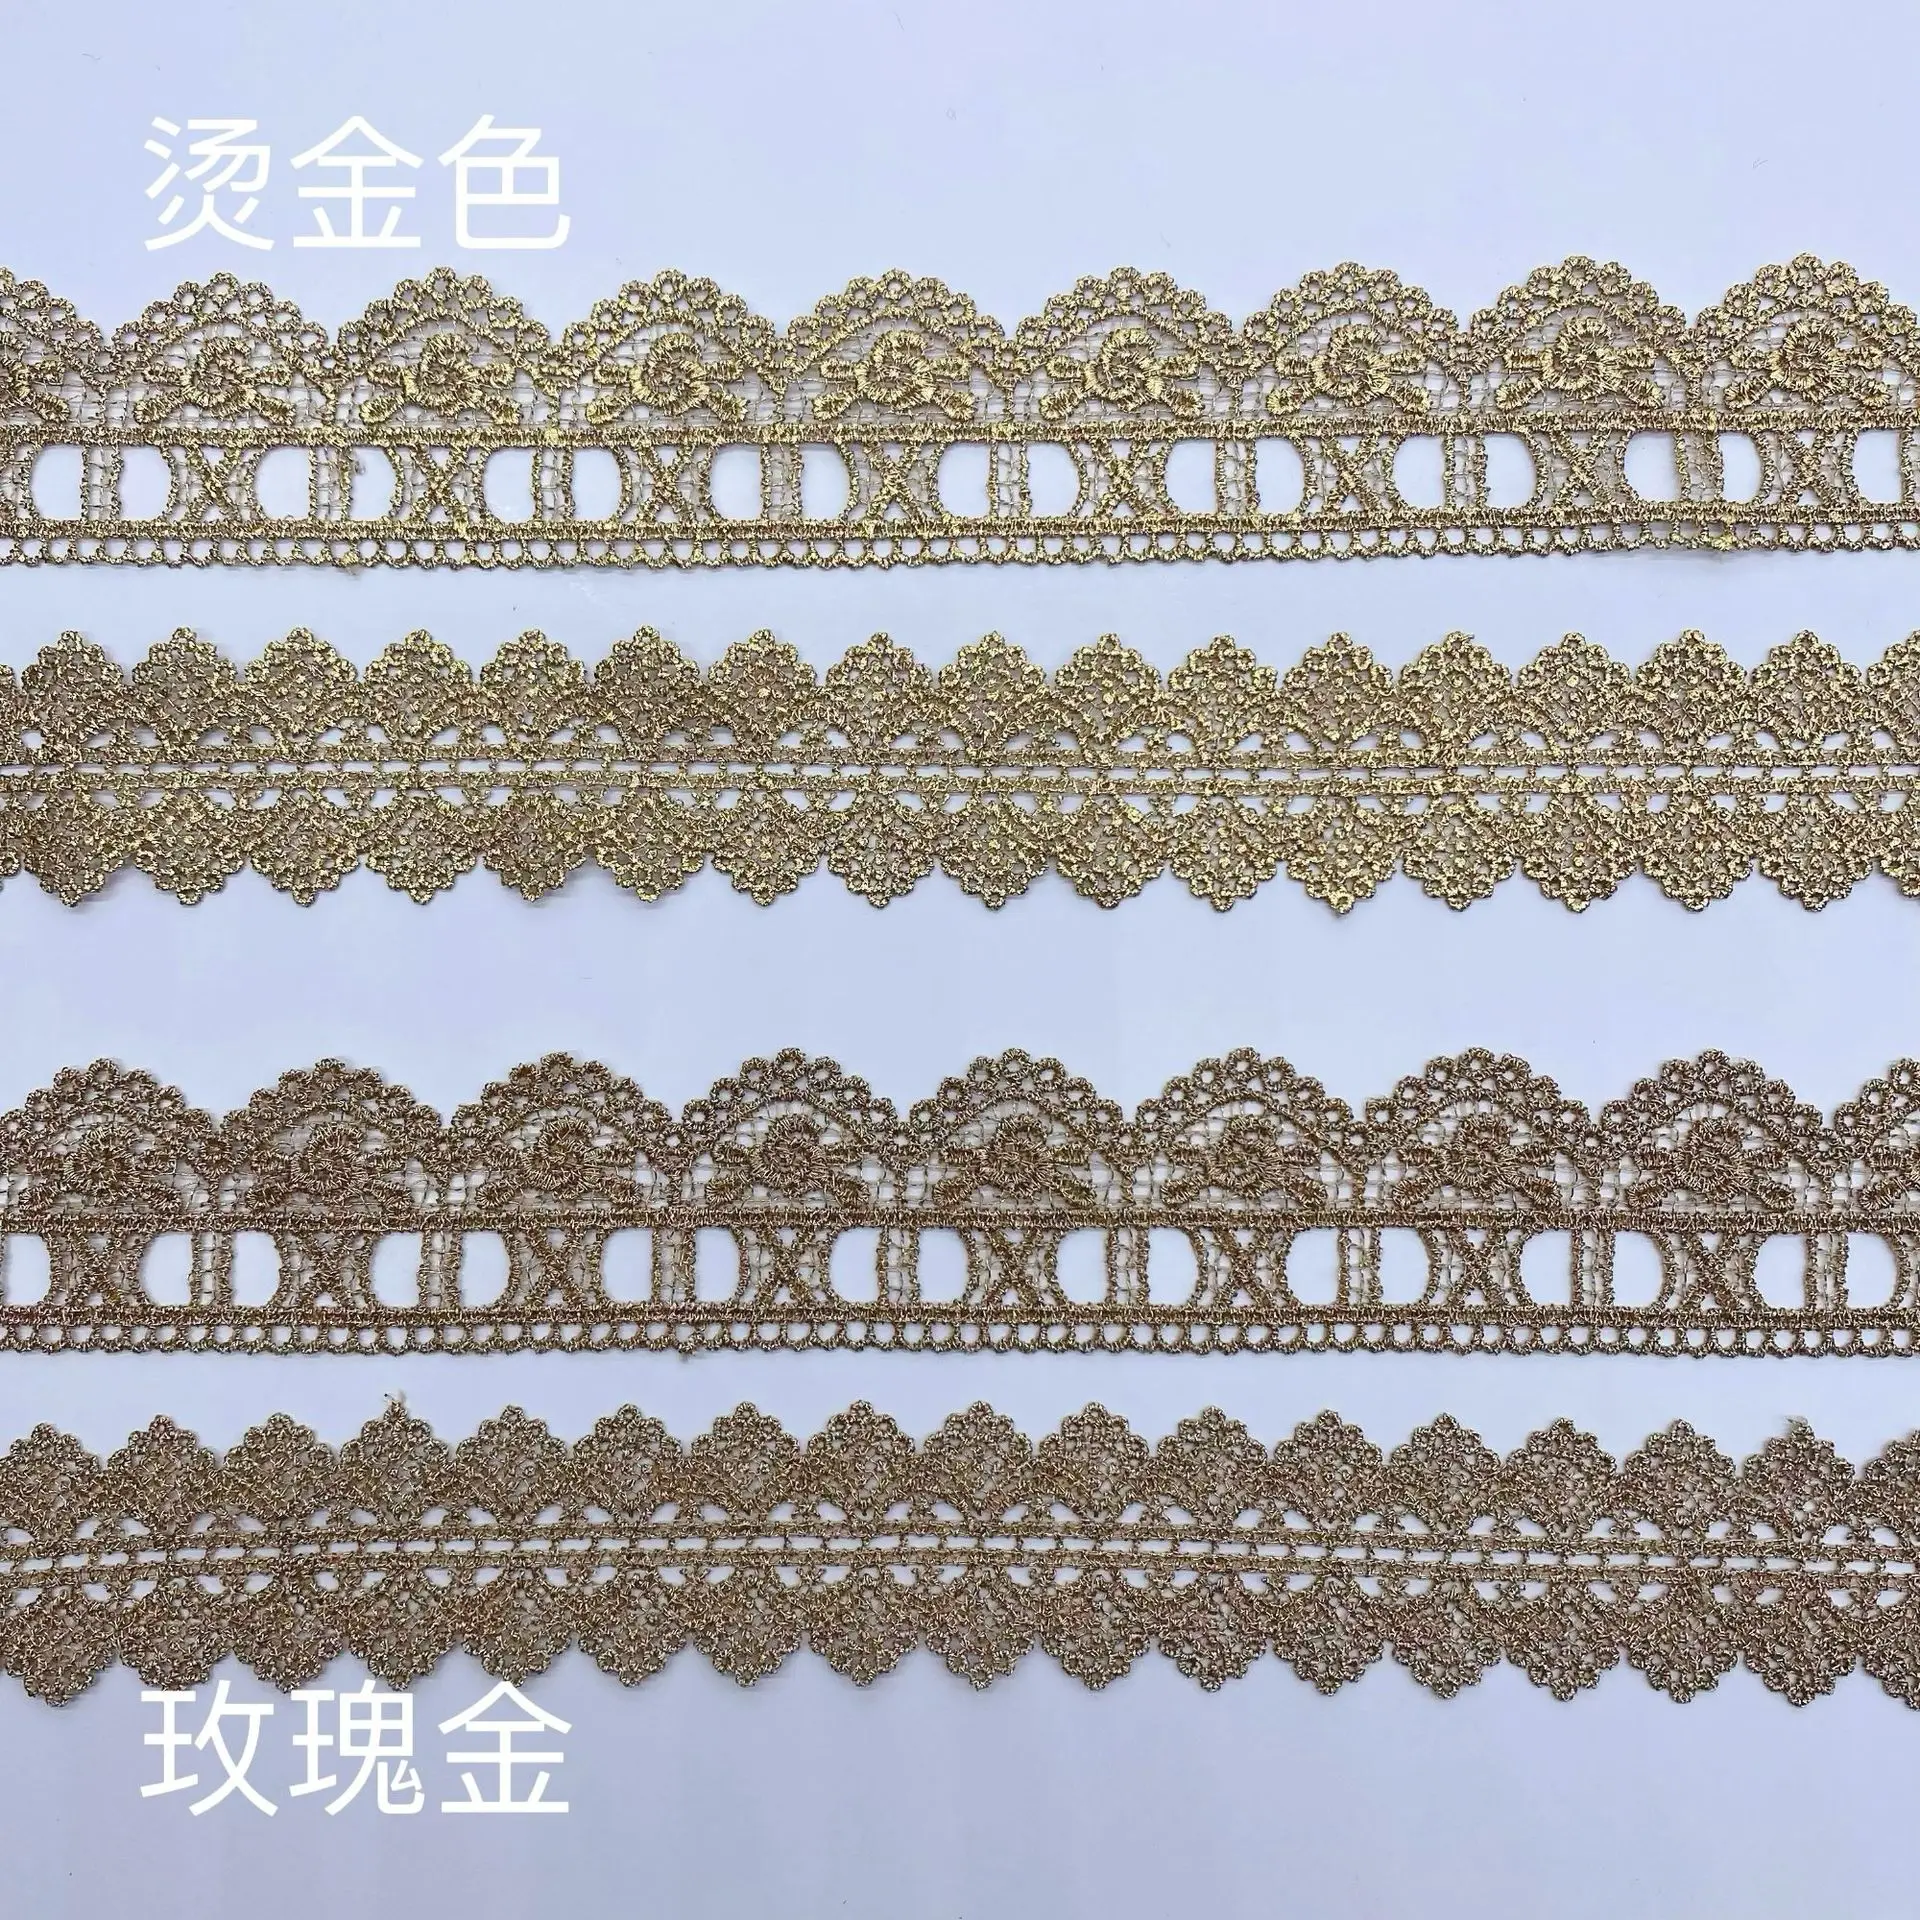 3Yards Of Bilateral Flower Gold Lace Wearable Webbing Lace Fabric Exquisite Lace Trim DIY Sewing Children's Clothing Materials